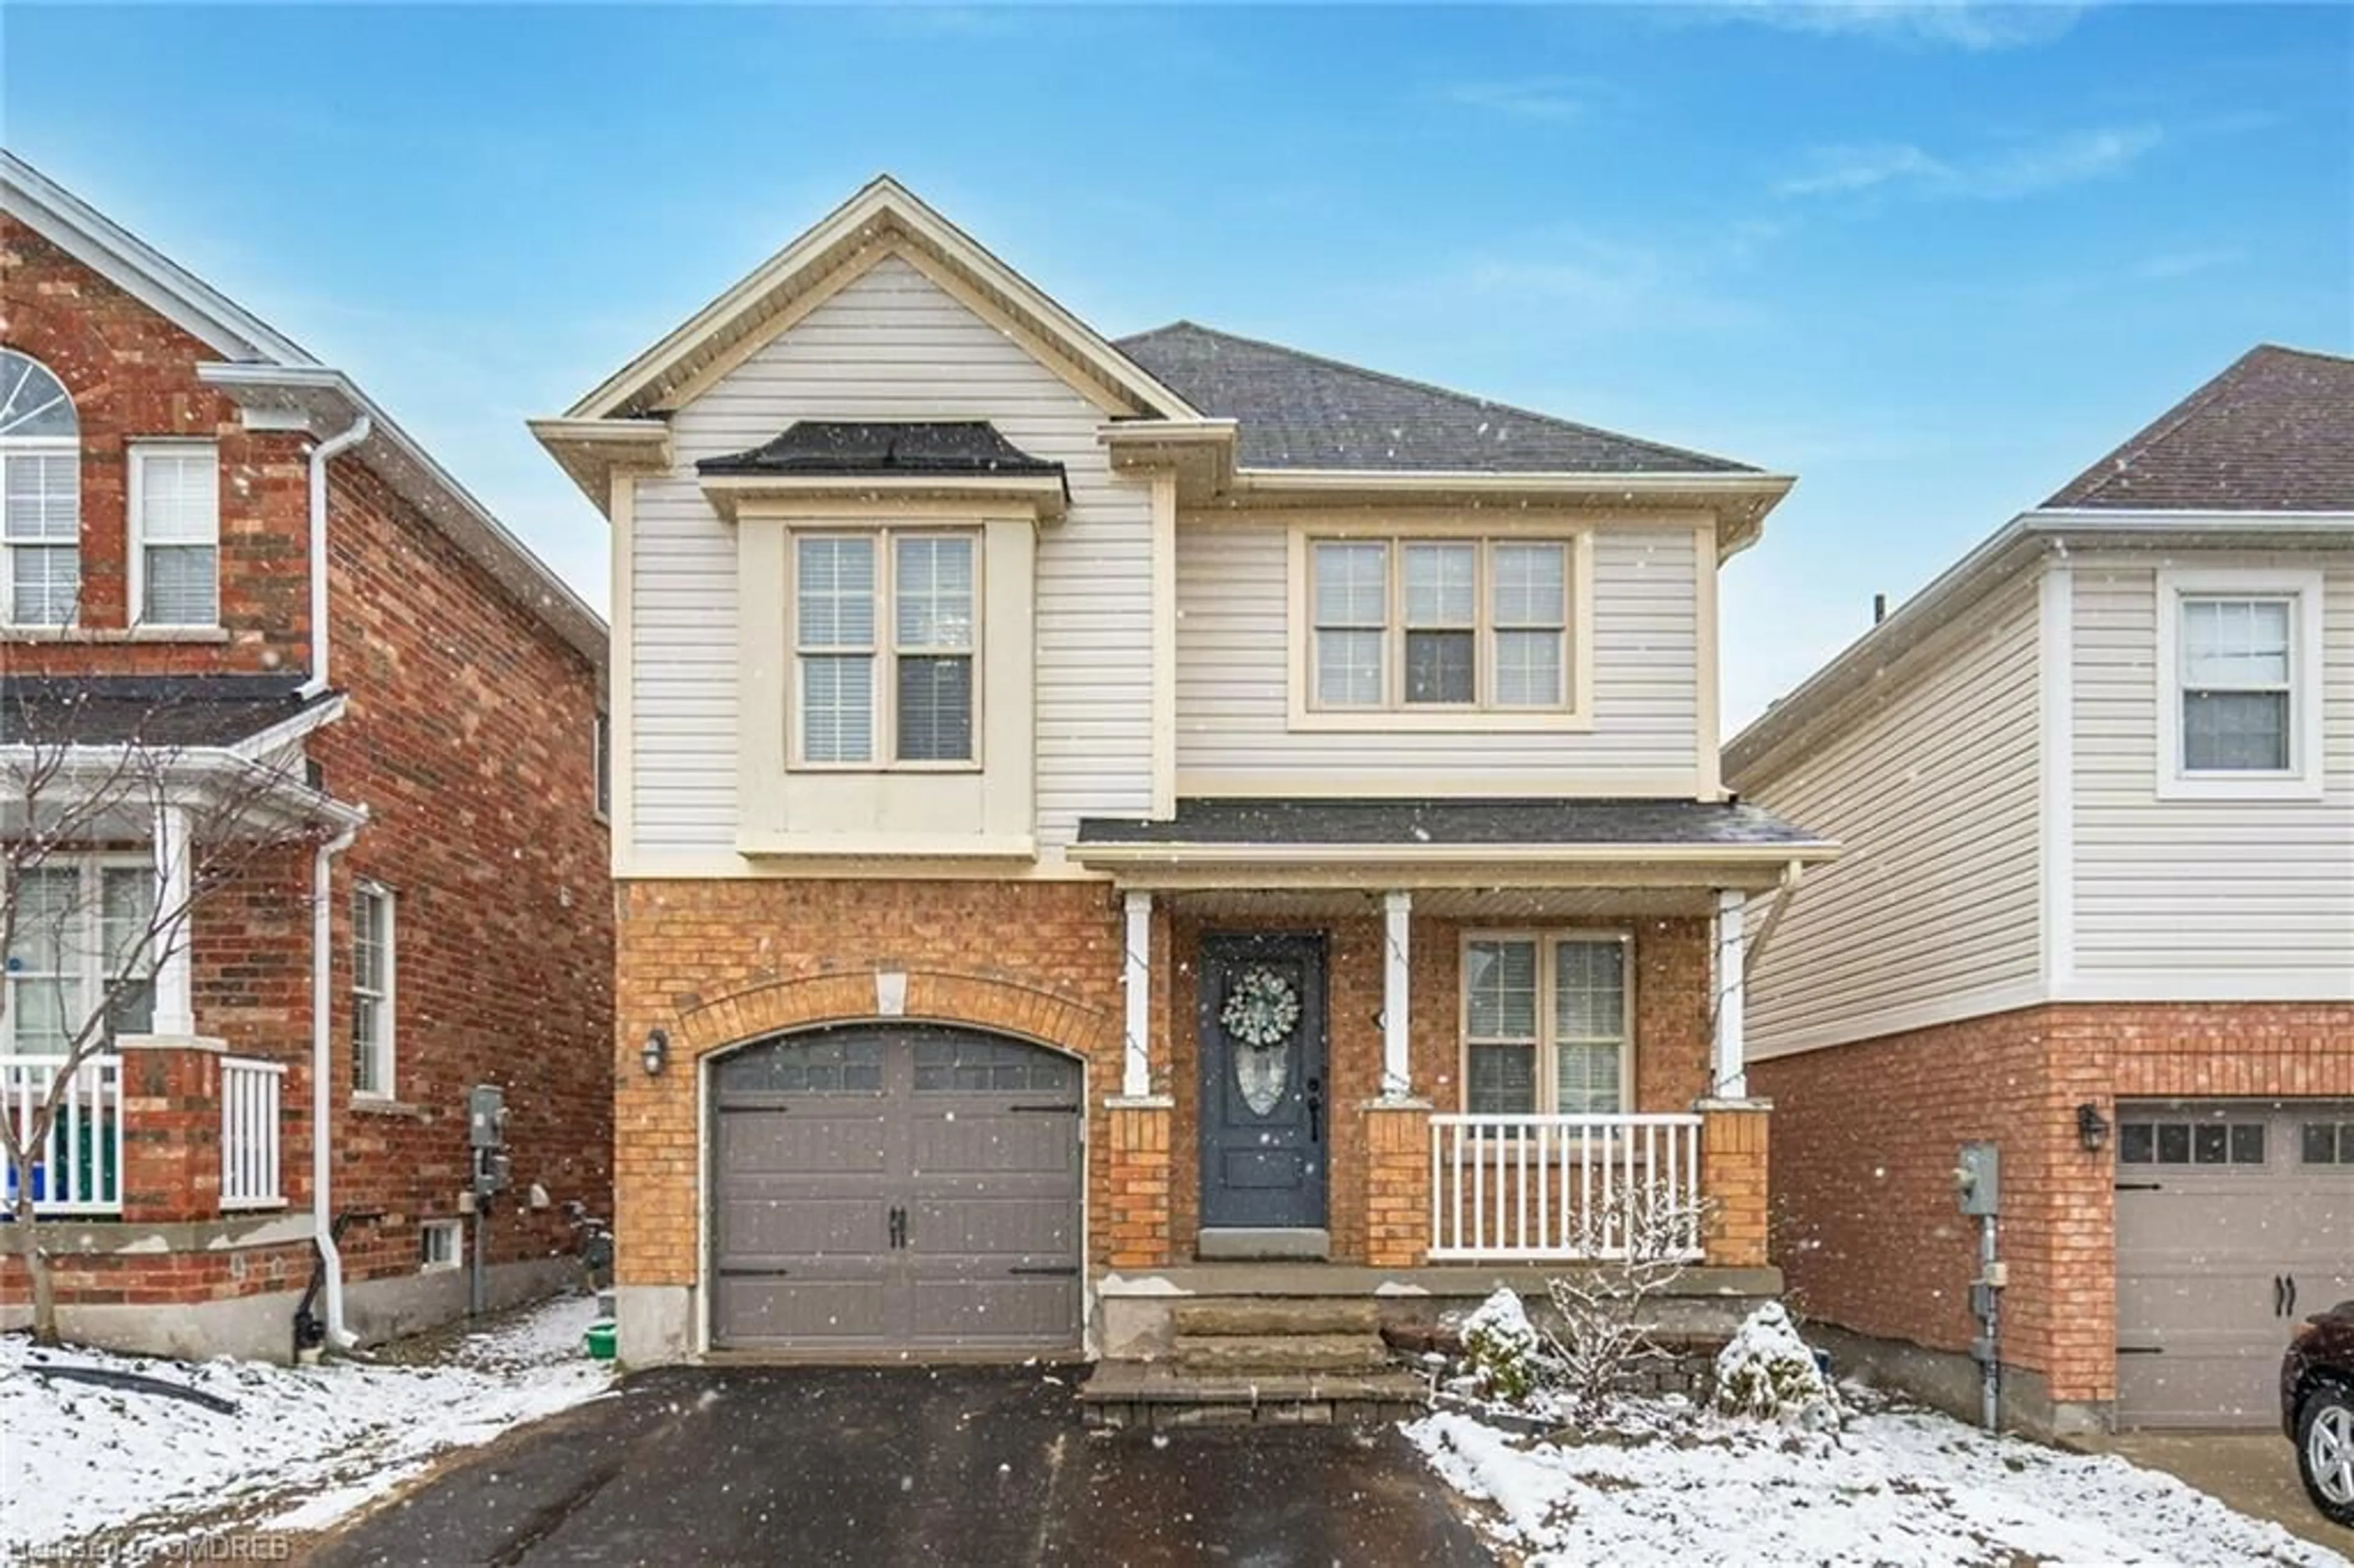 Home with brick exterior material for 51 Yeaman Dr, Cambridge Ontario N1P 1J6